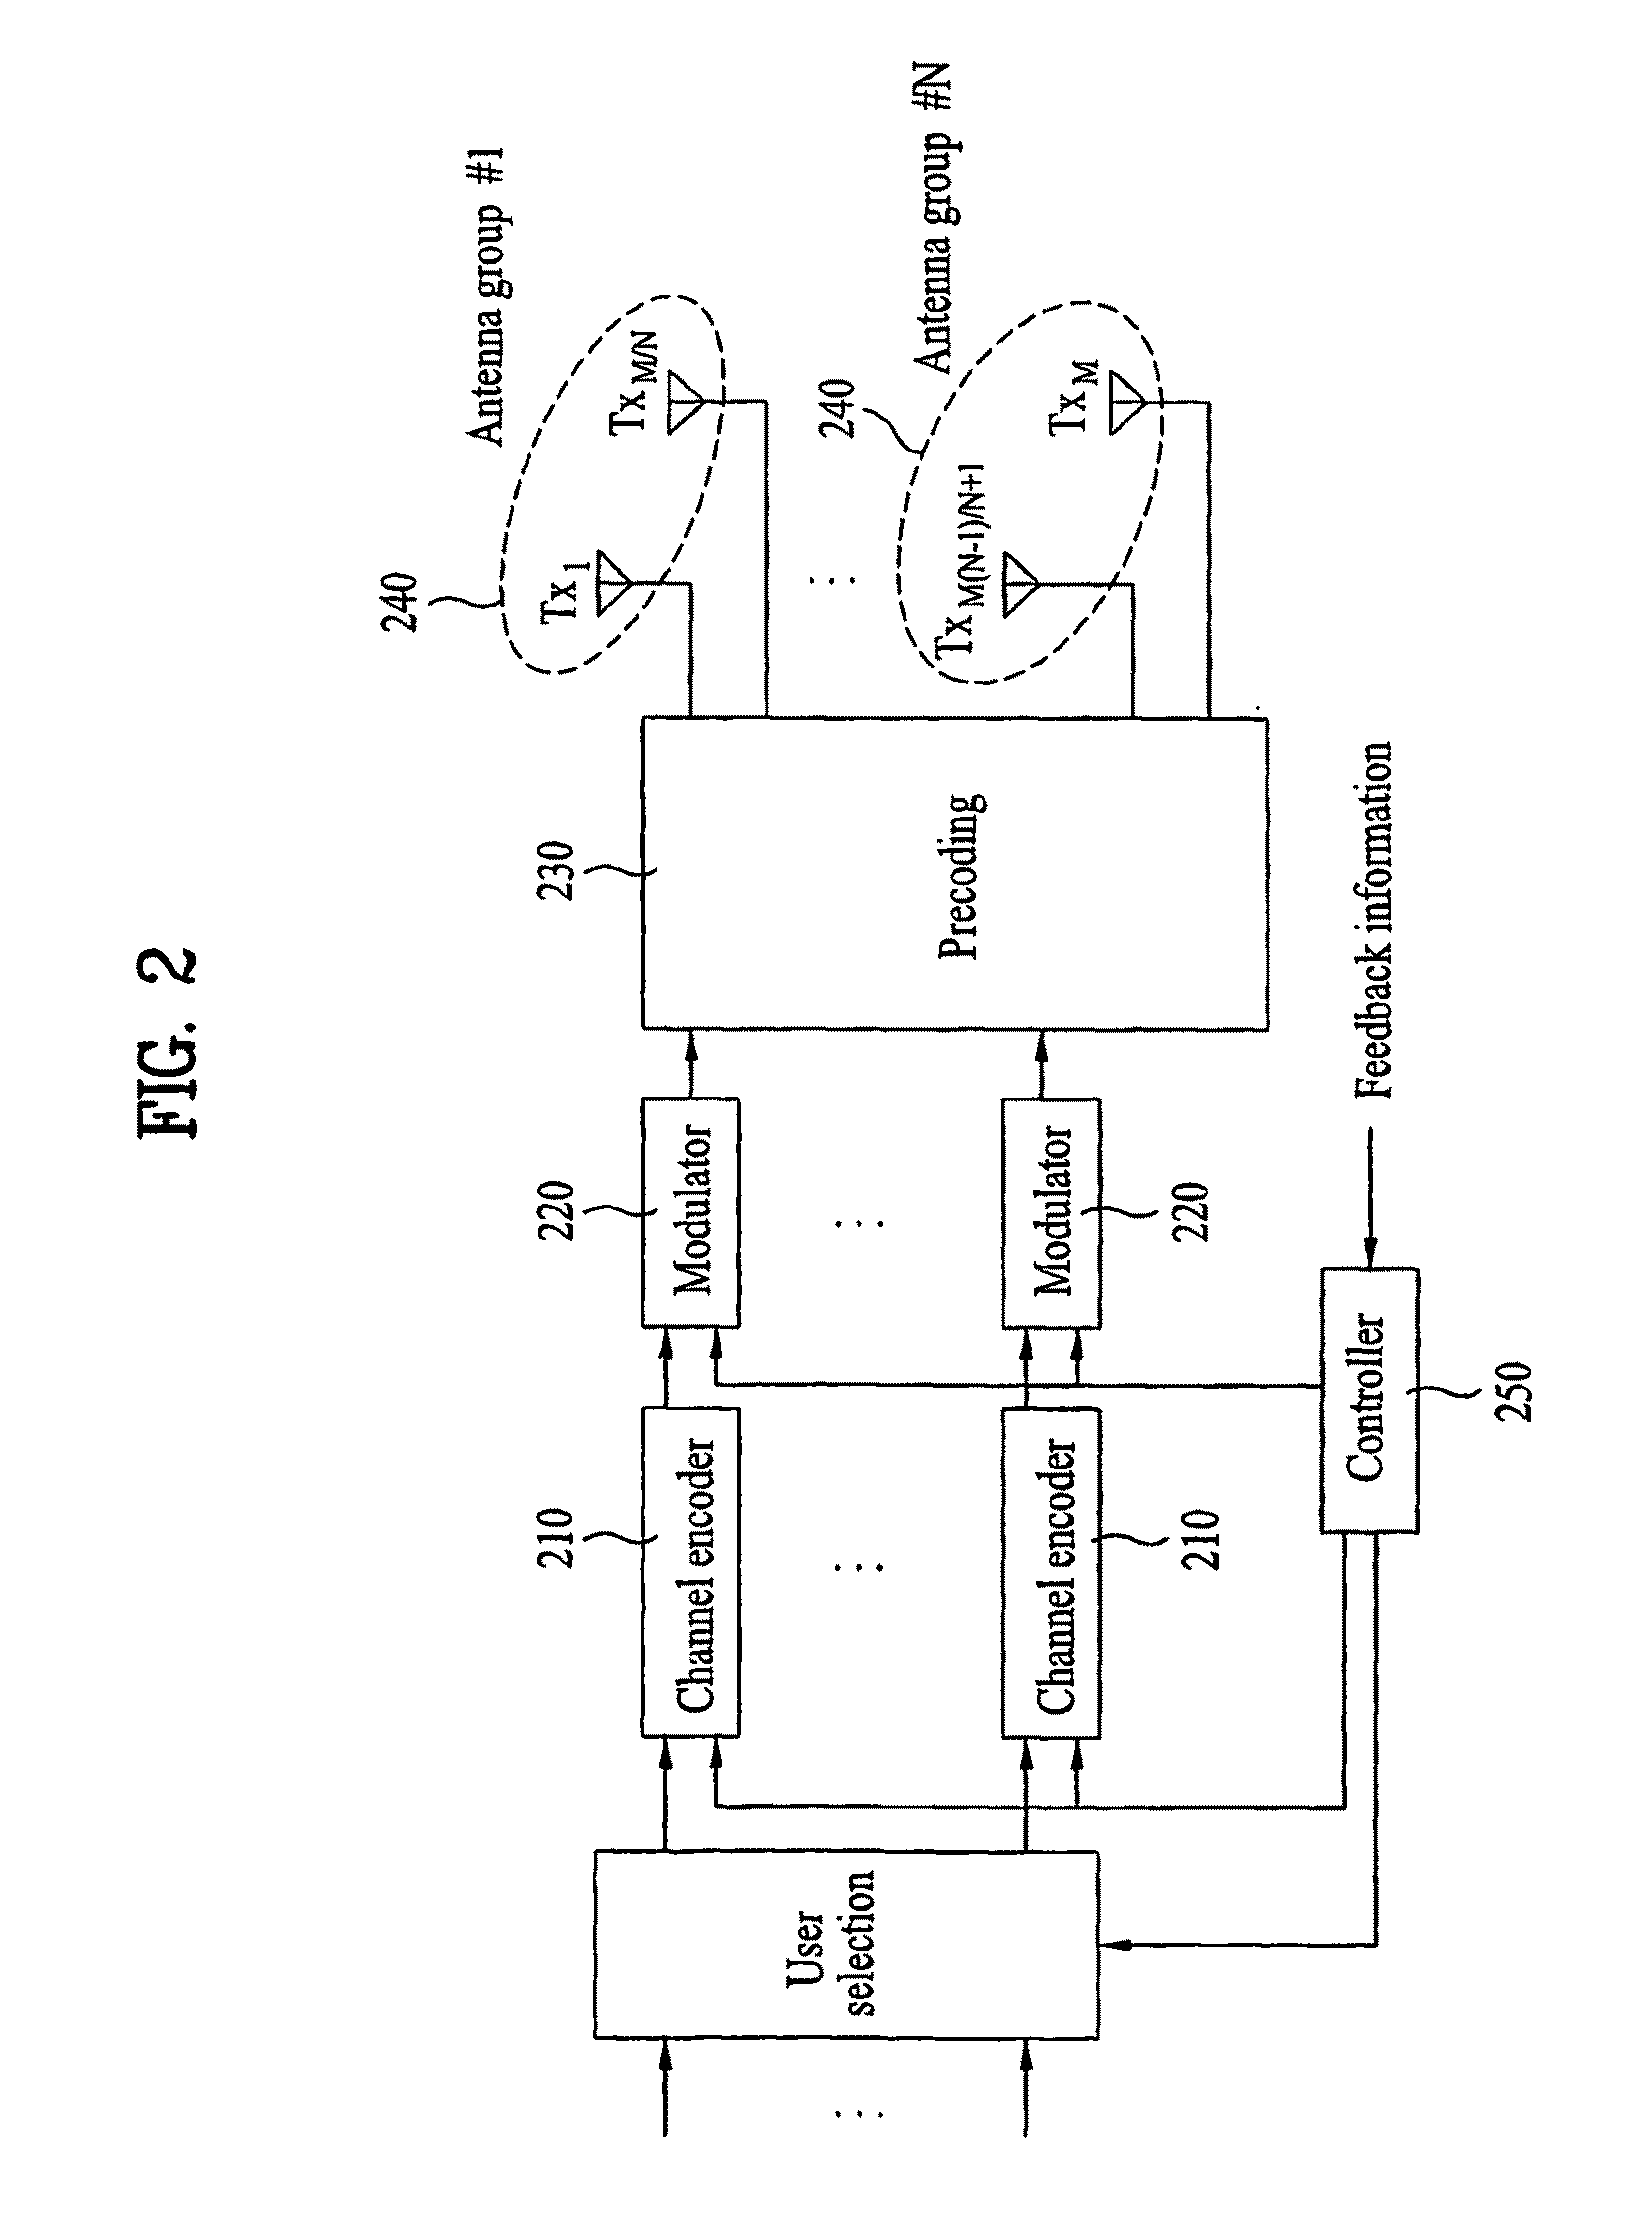 Method of transmitting feedback information for precoding and precoding method